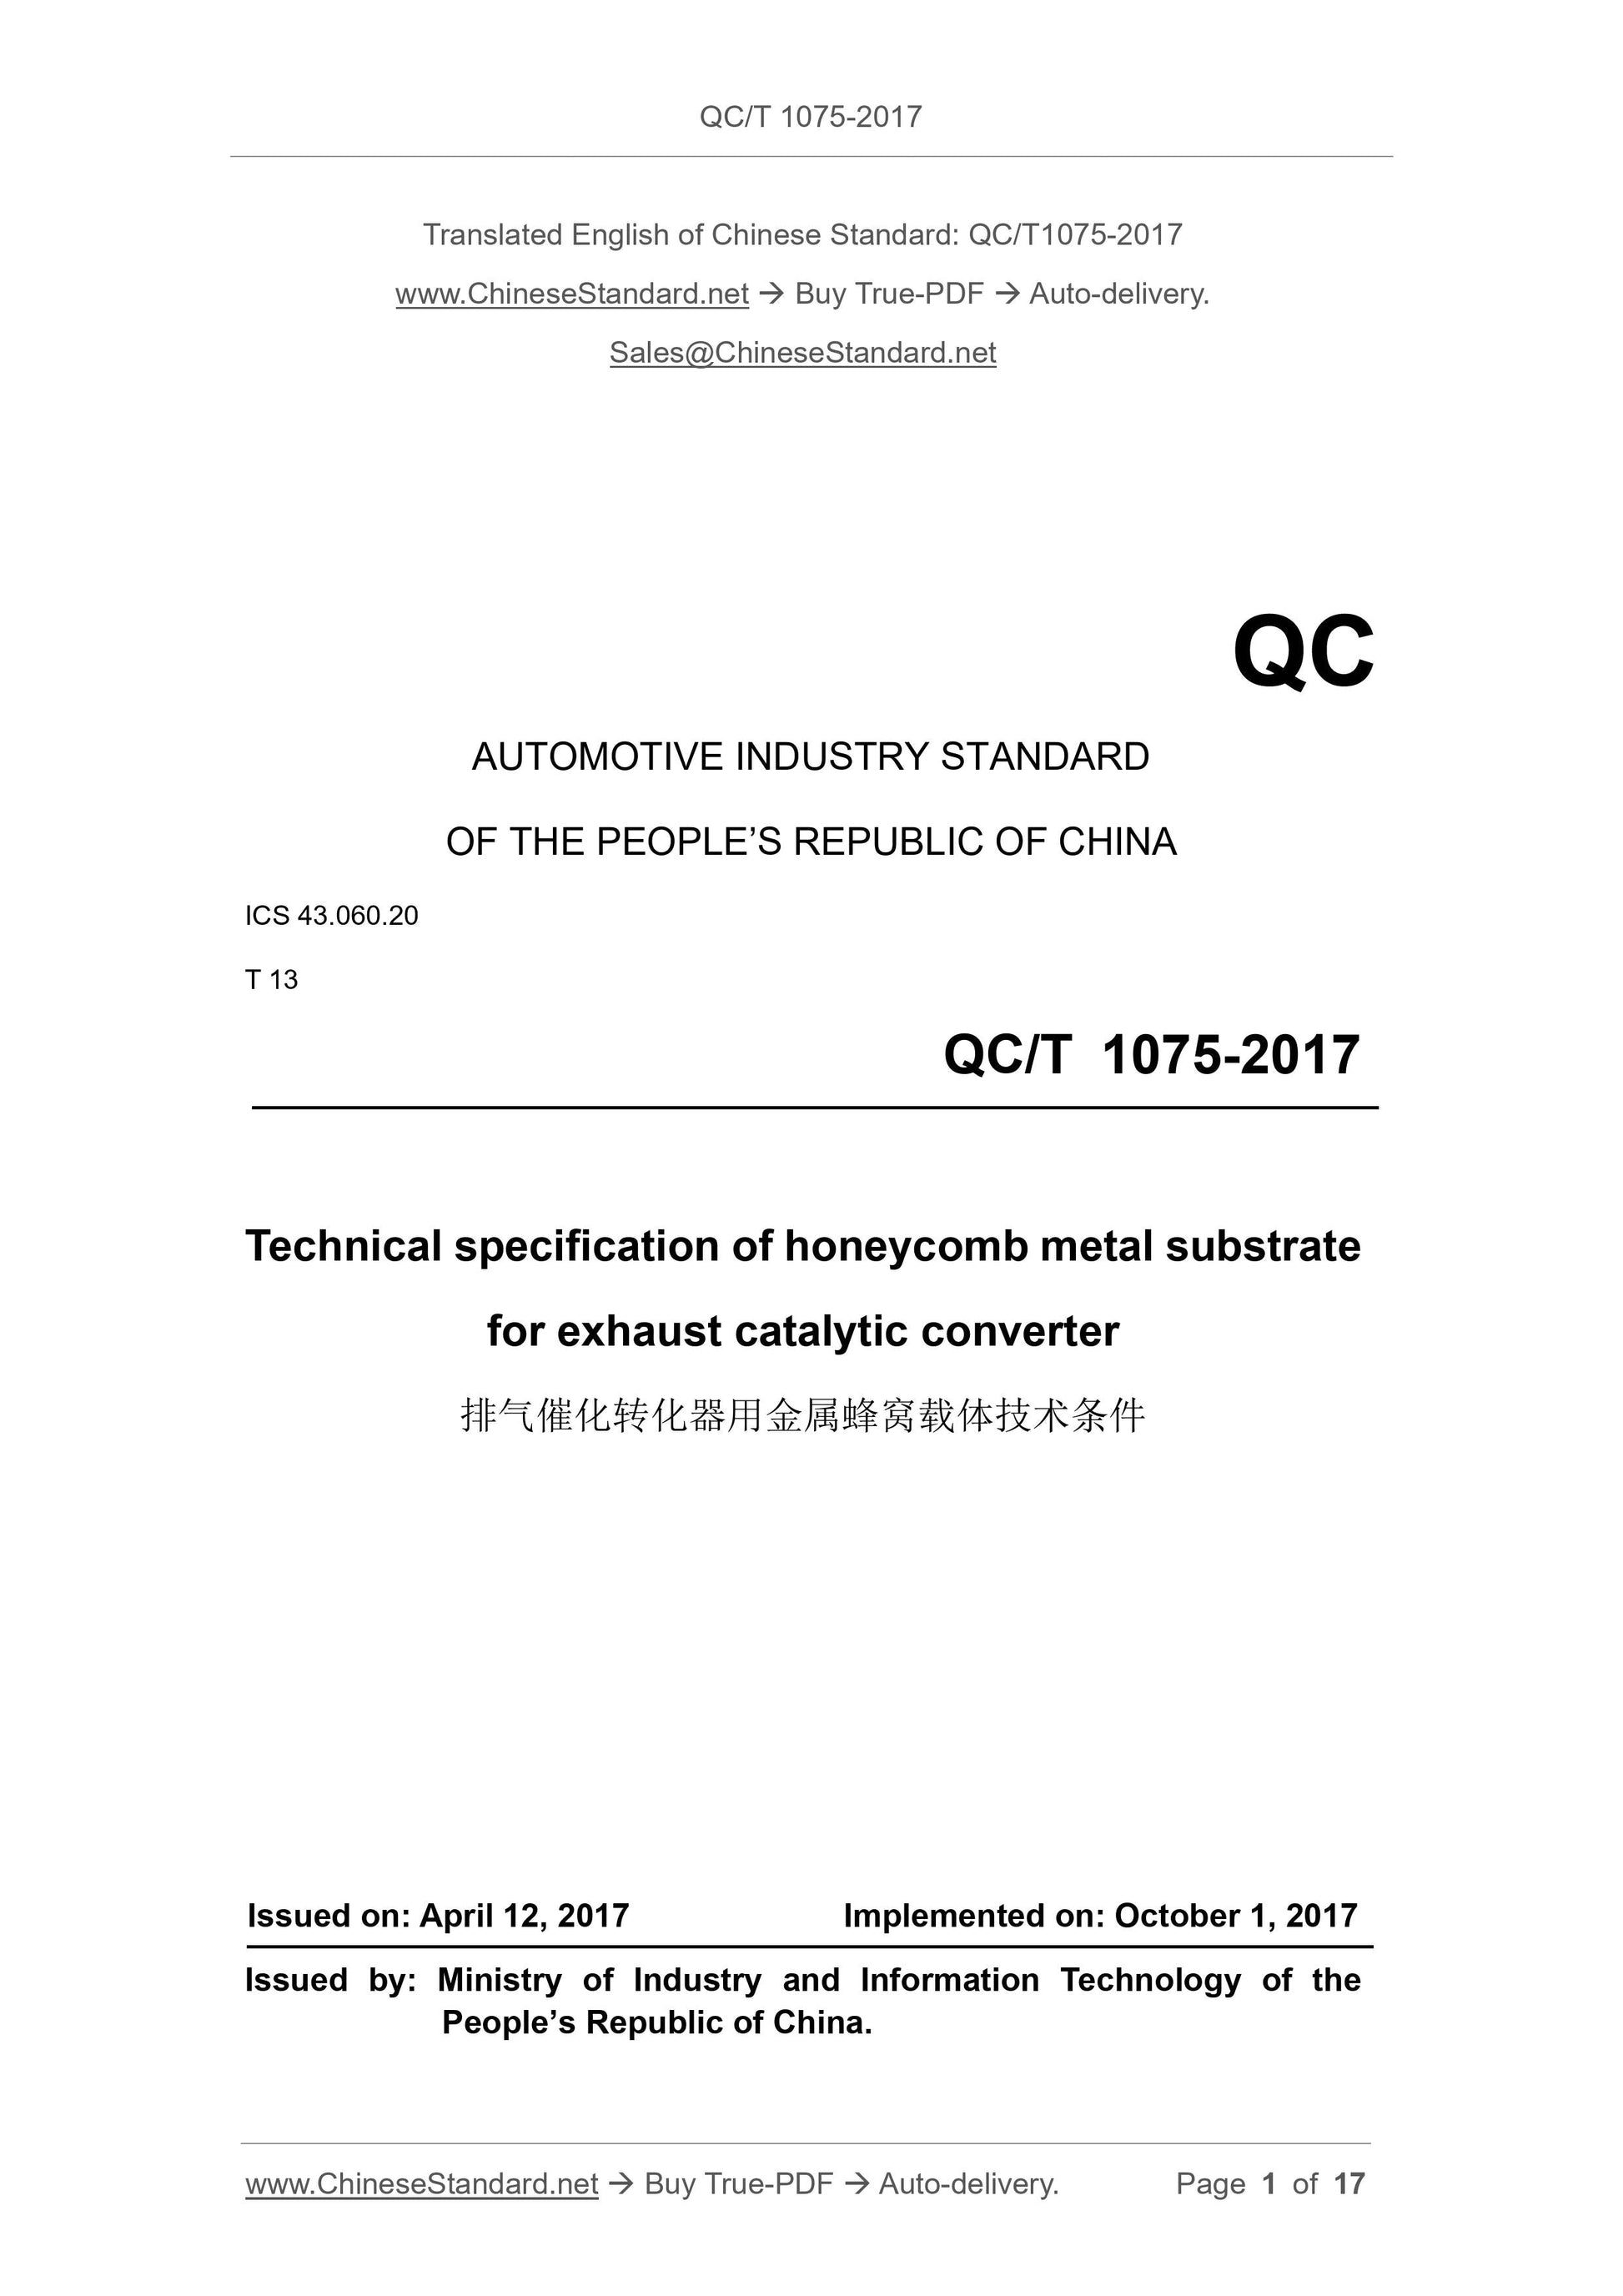 QC/T 1075-2017 Page 1